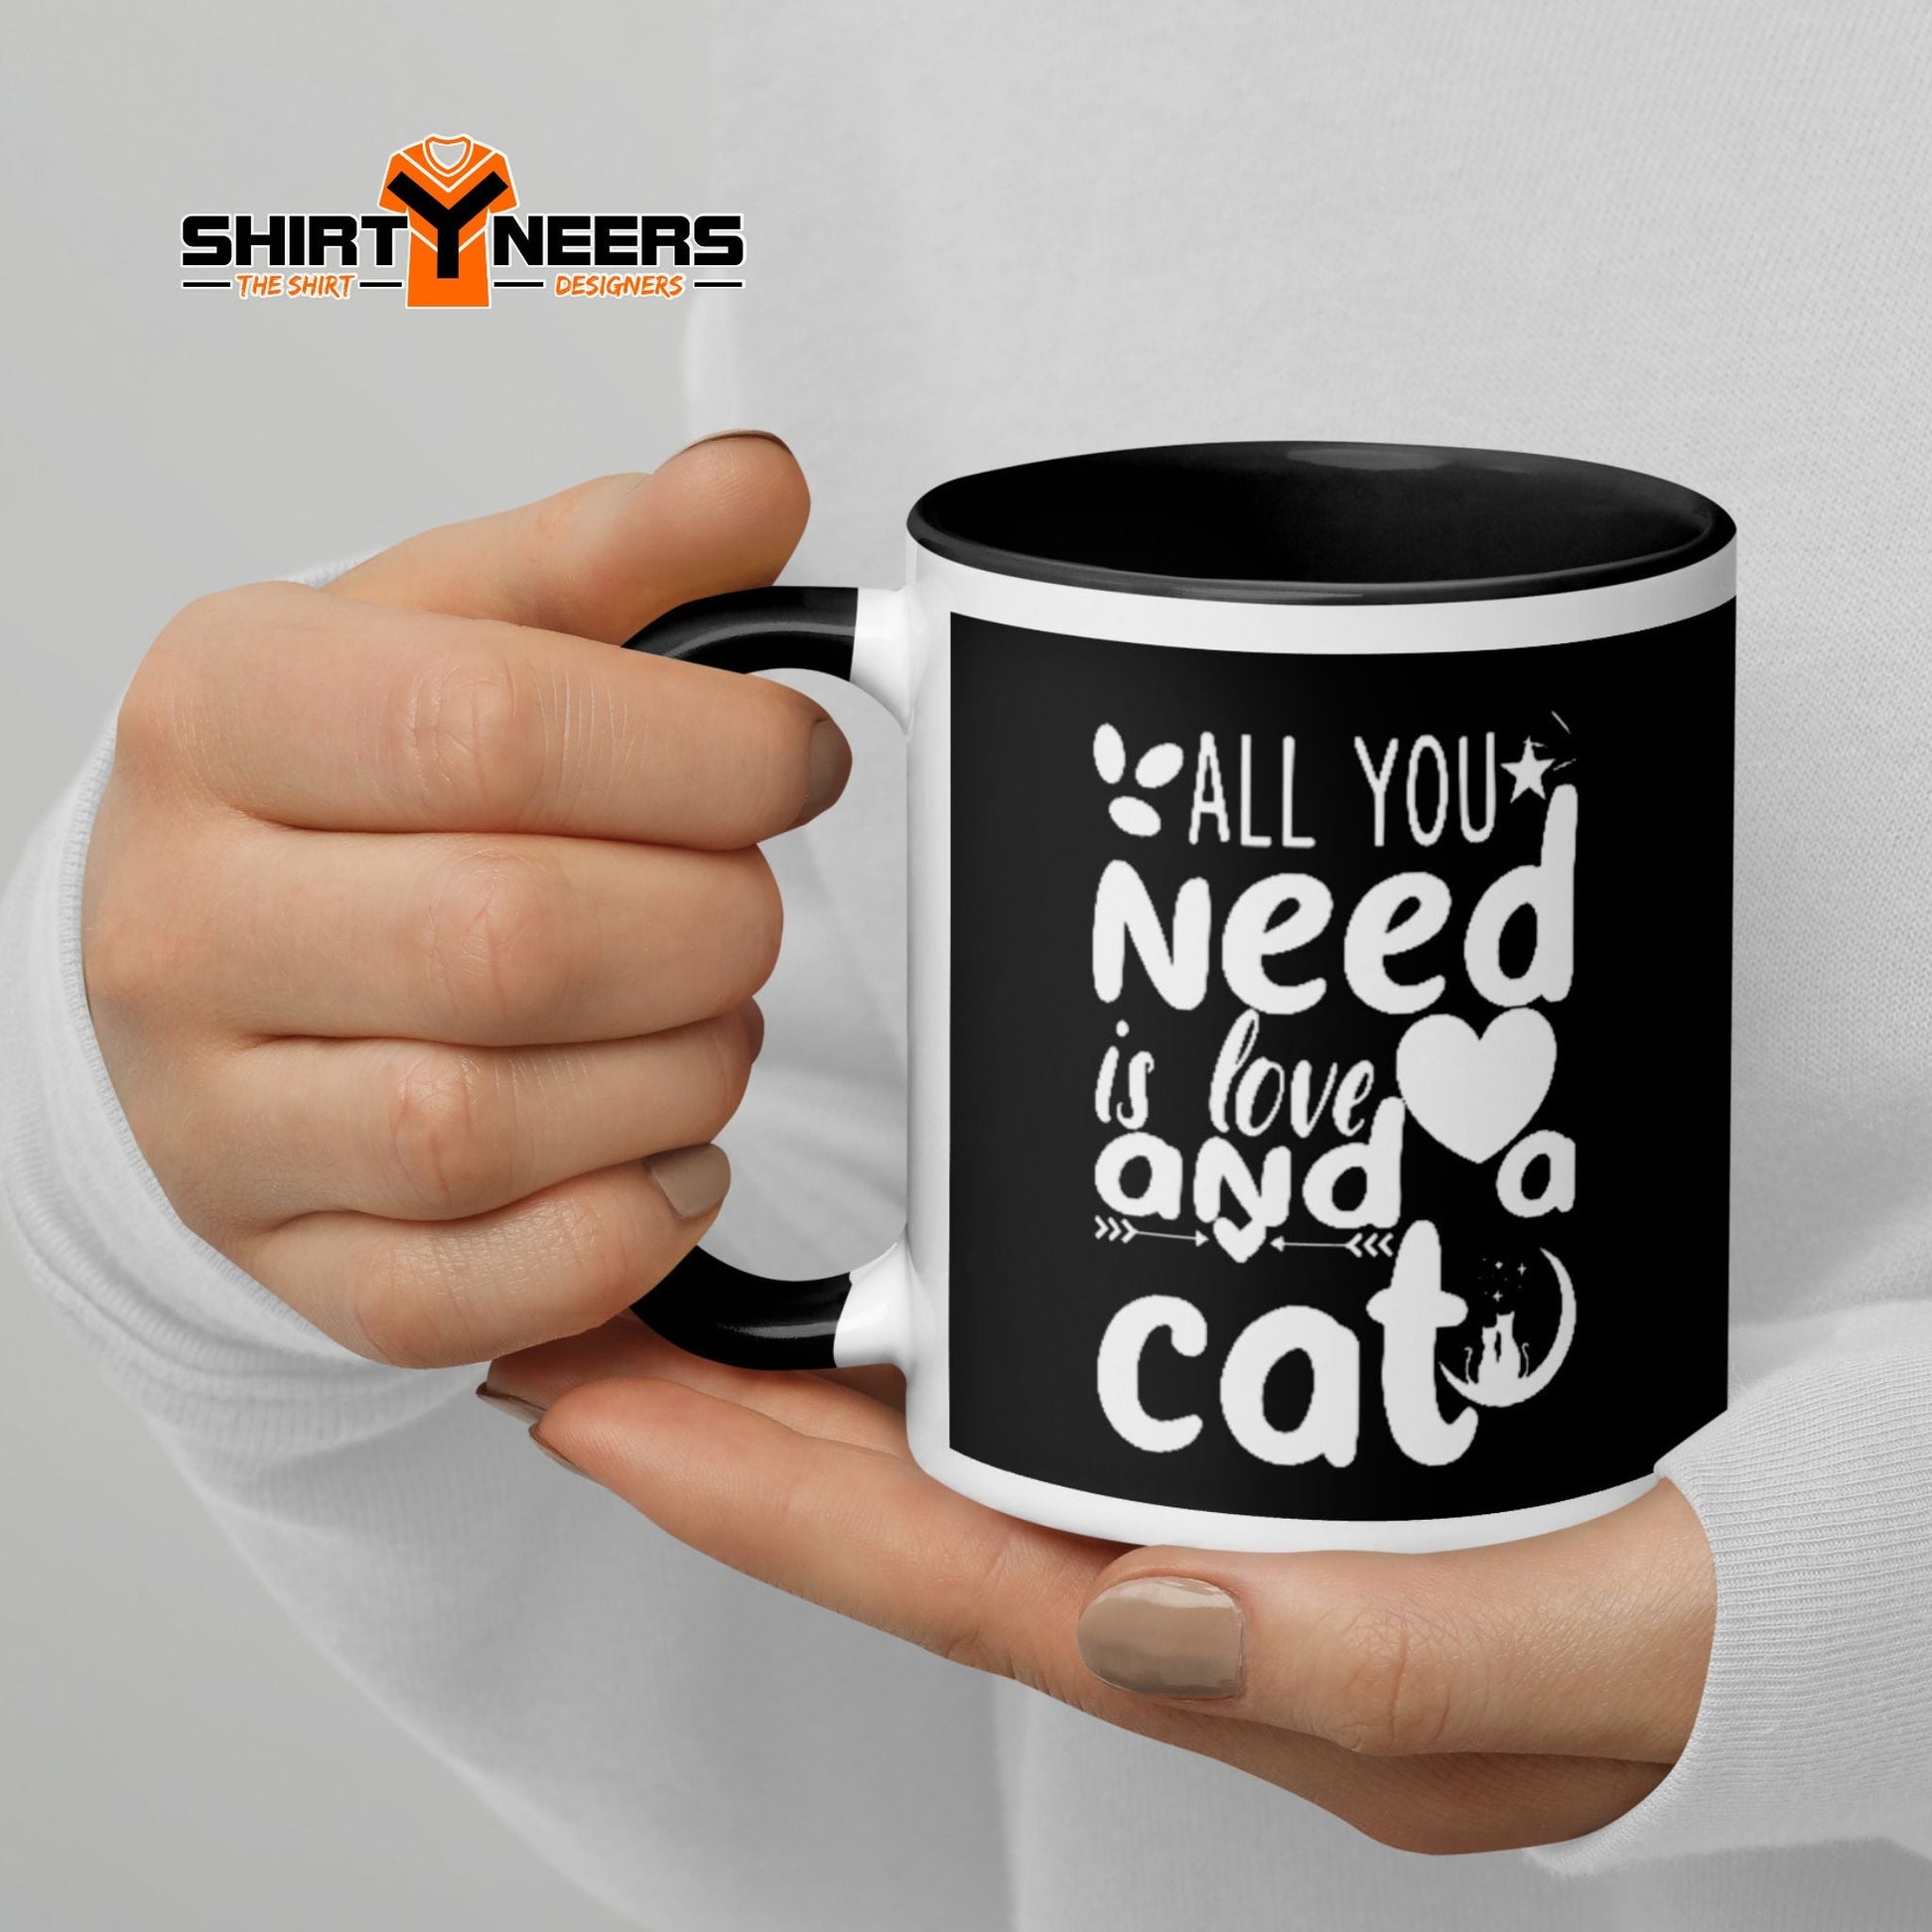 All you need is love and a cat – Tasse mit Aufdruck -